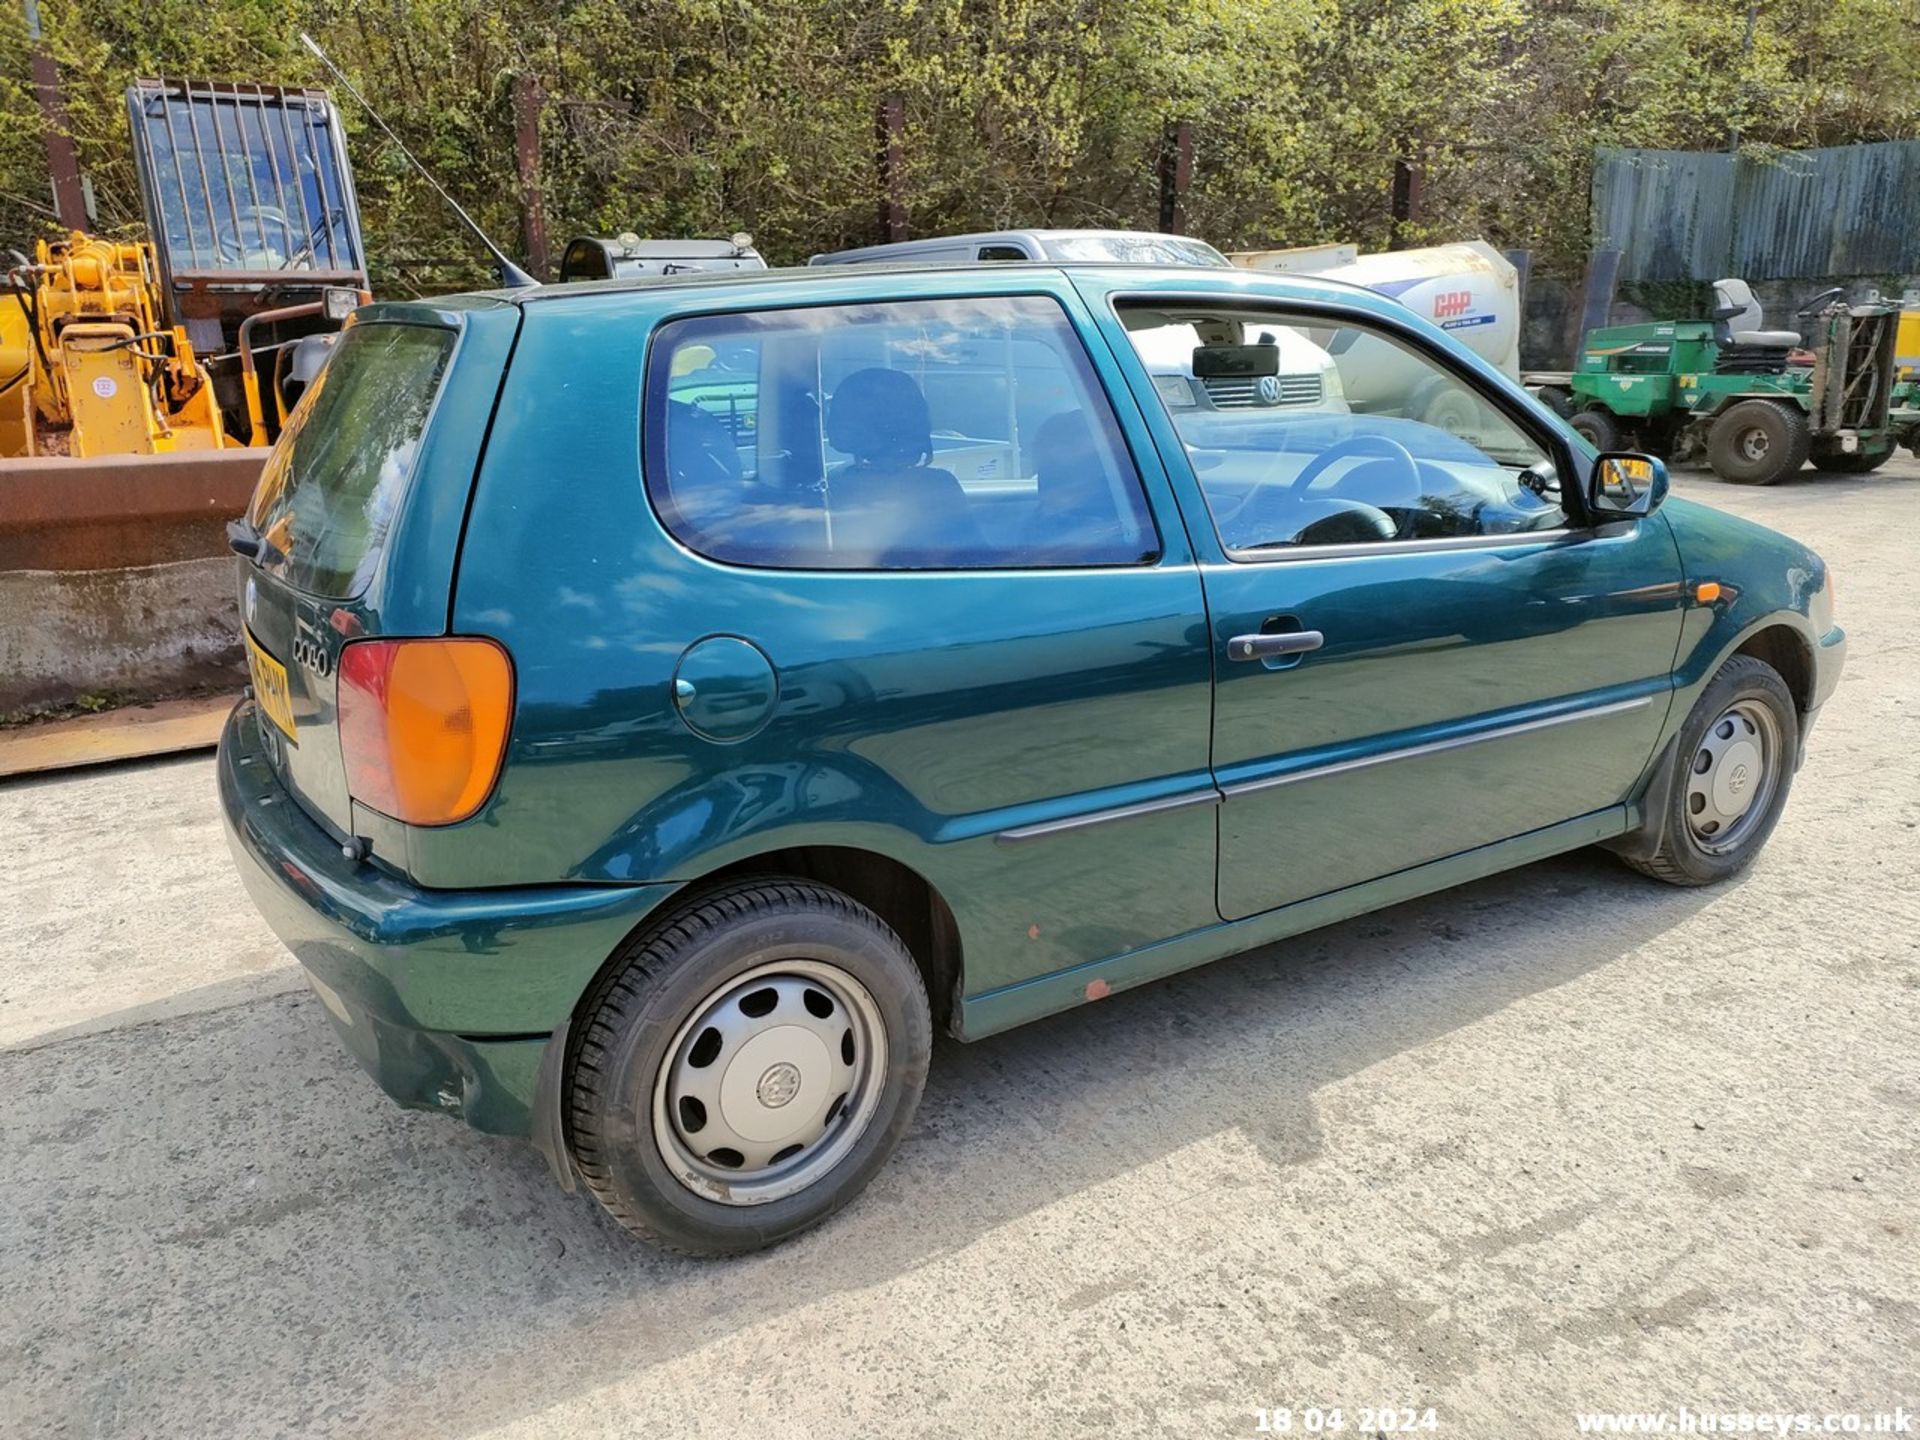 1997 VOLKSWAGEN POLO 1.4 CL AUTO - 1390cc 3dr Hatchback (Green, 68k) - Image 40 of 60